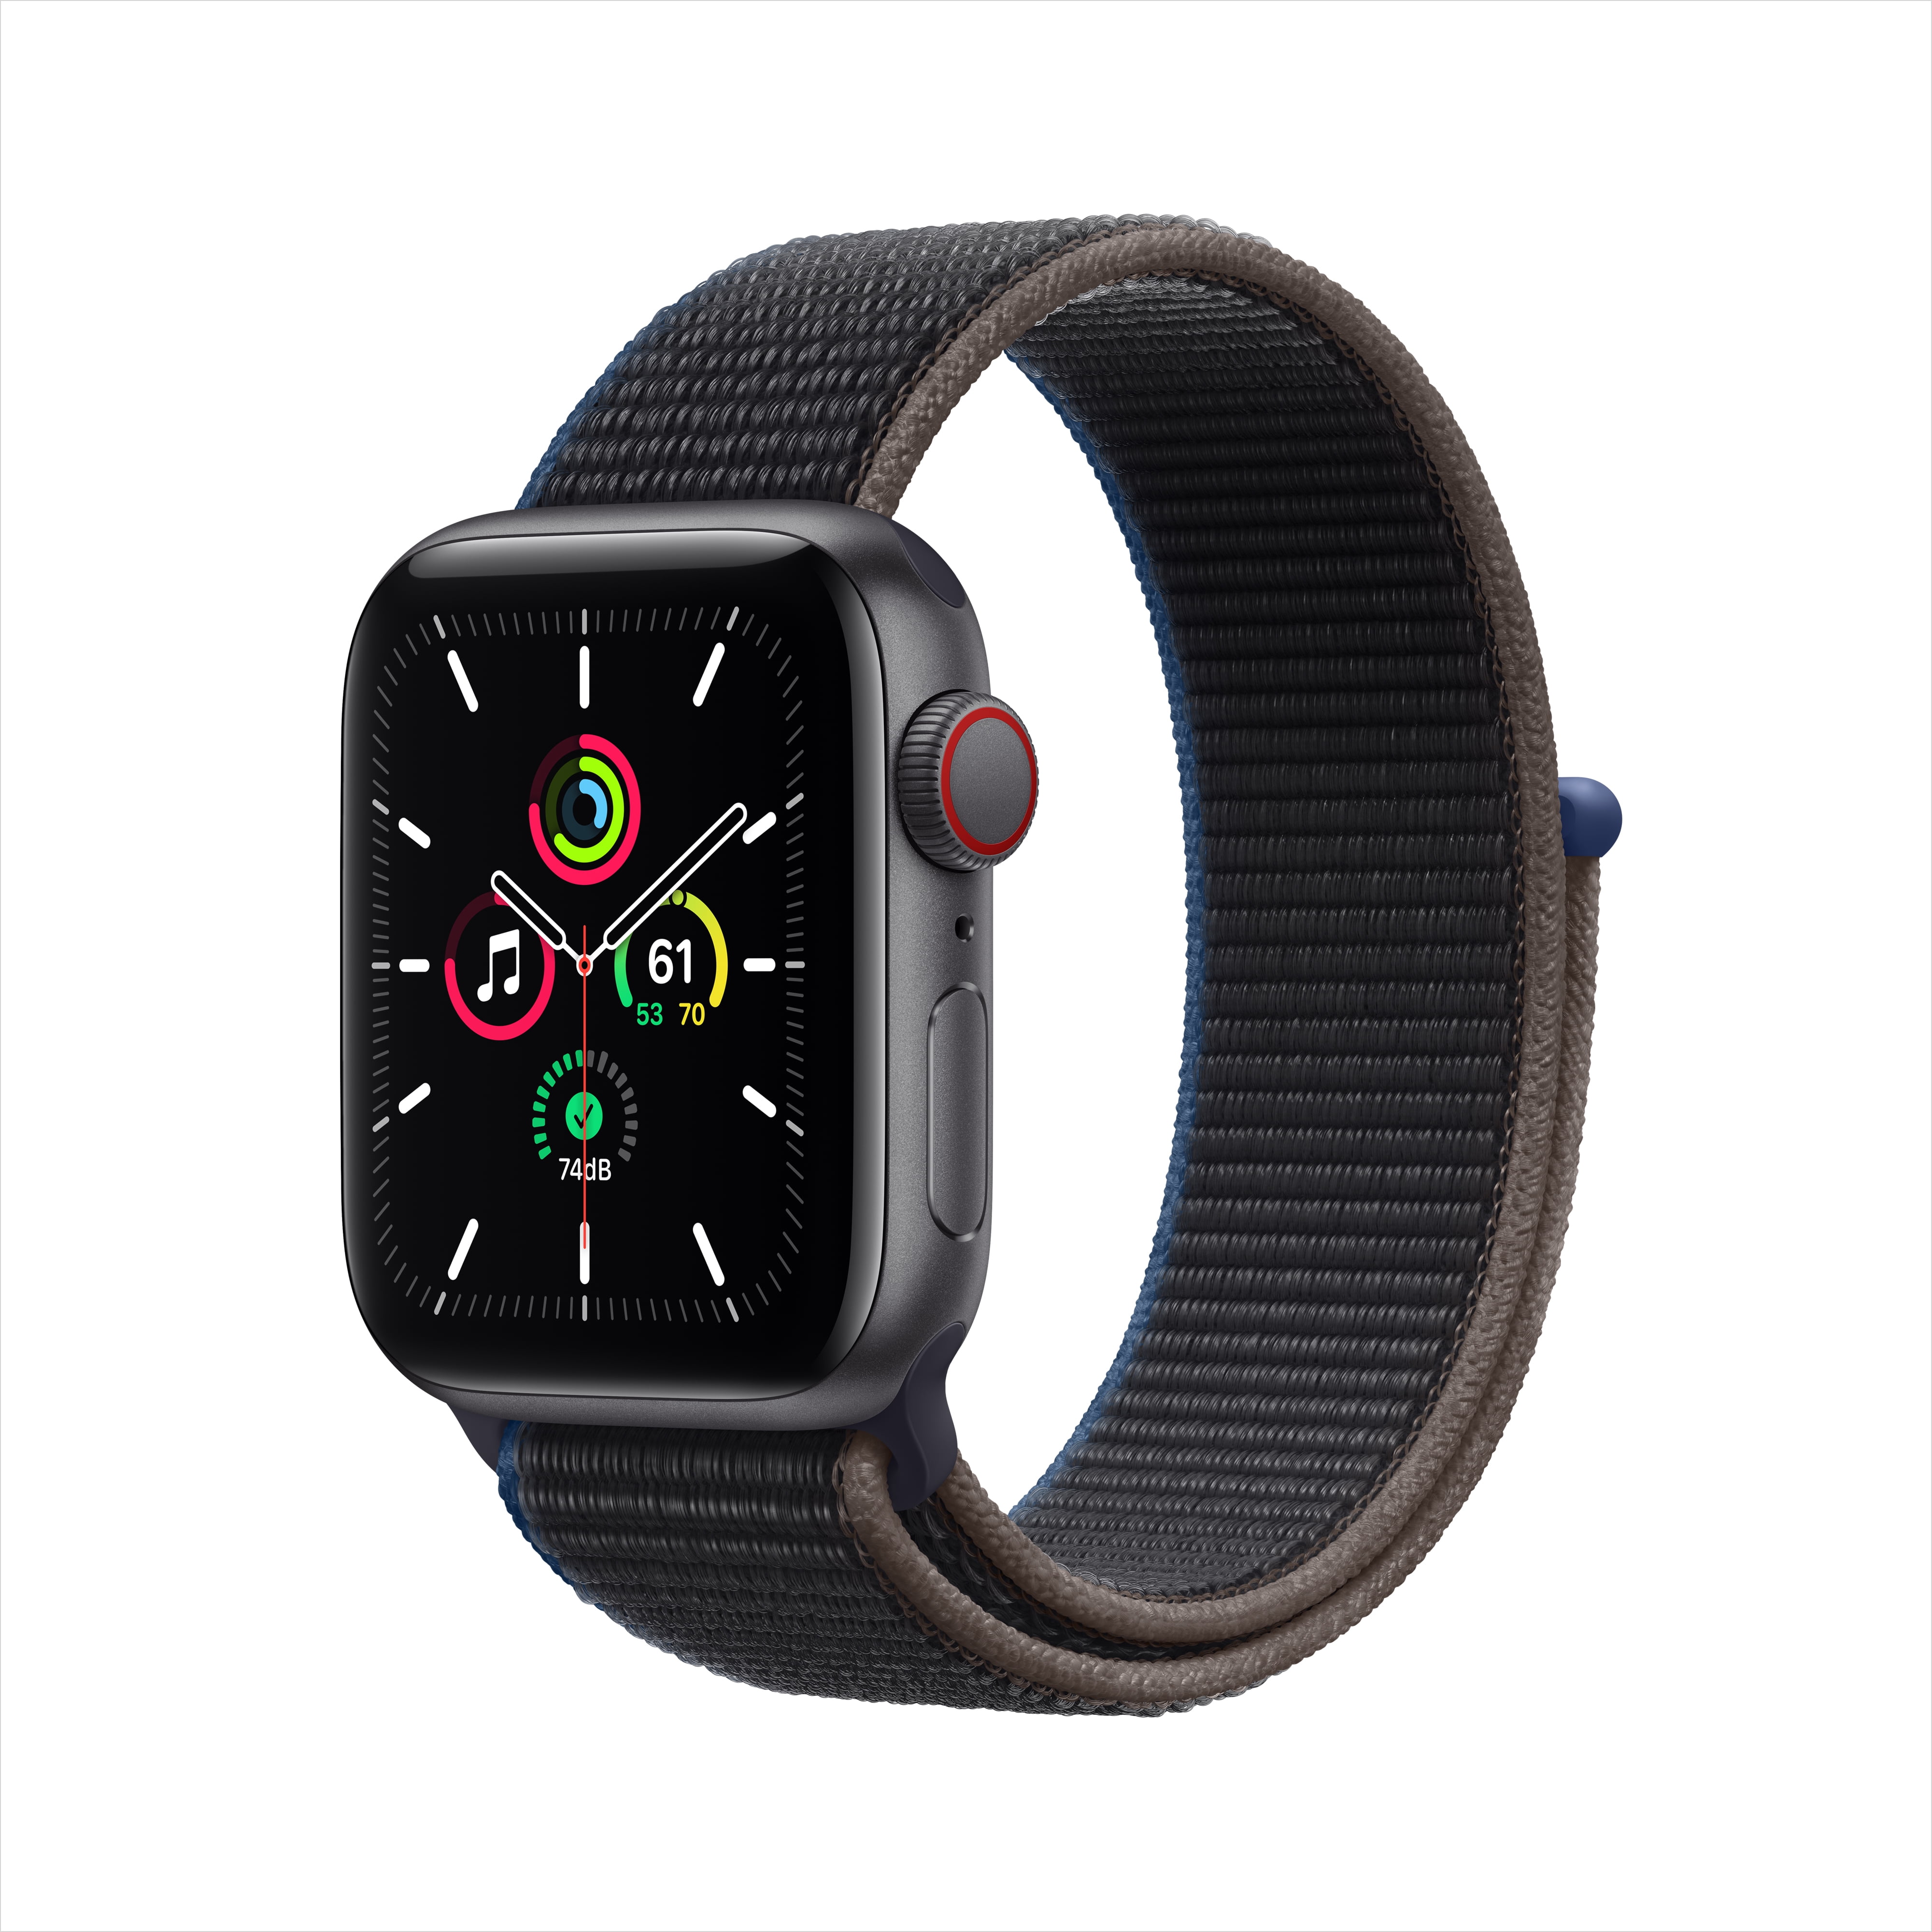 Apple Watch + Loop Space 40mm Case Charcoal with GPS Gray Aluminum Cellular, SE Sport